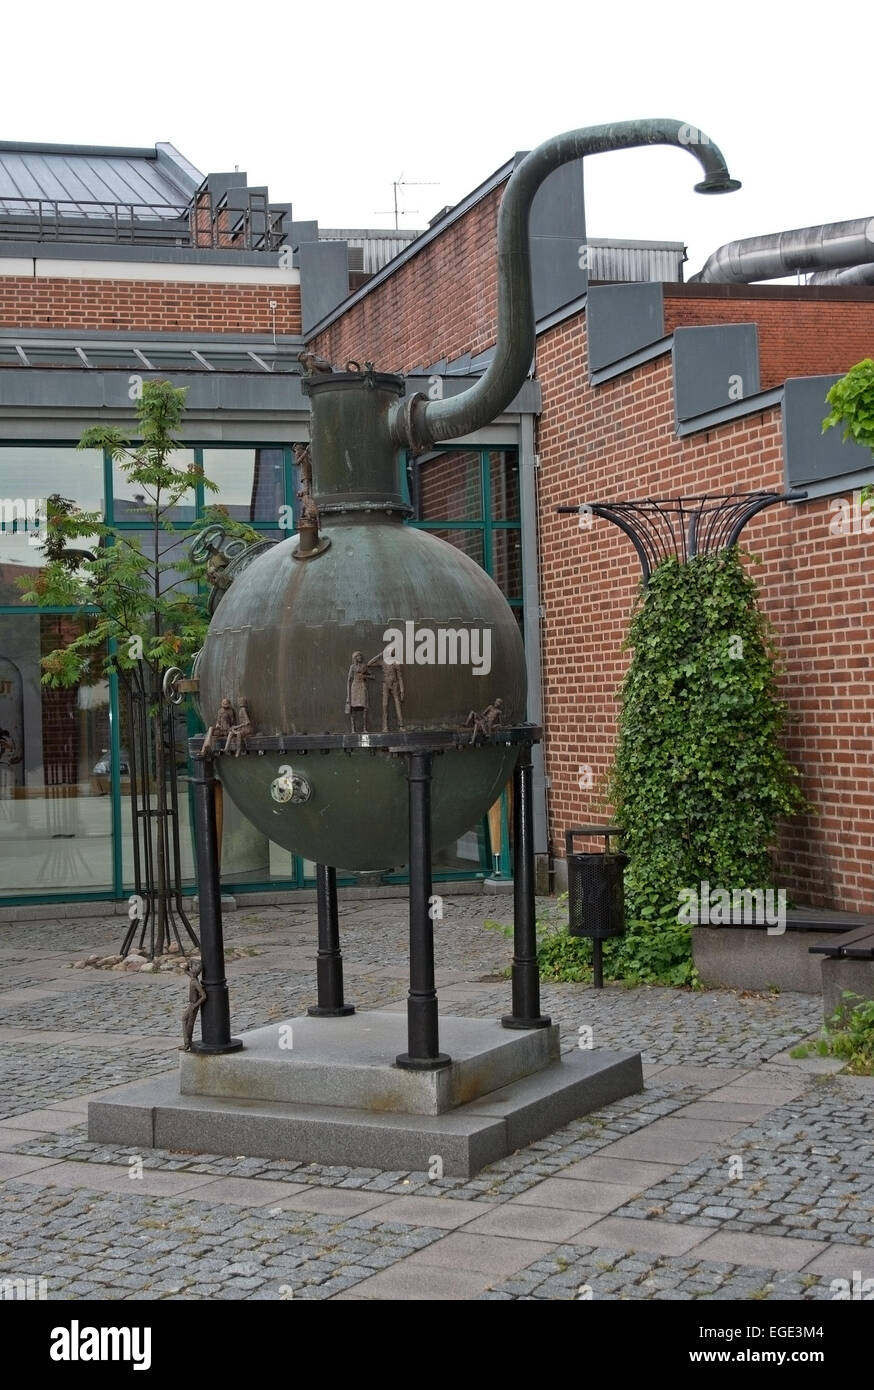 AHUS, SOUTH SWEDEN - JUNE 28, 2014: Exterior decor by entrance of factory producing the world famous vodka 'Absolut' on June 28, Stock Photo